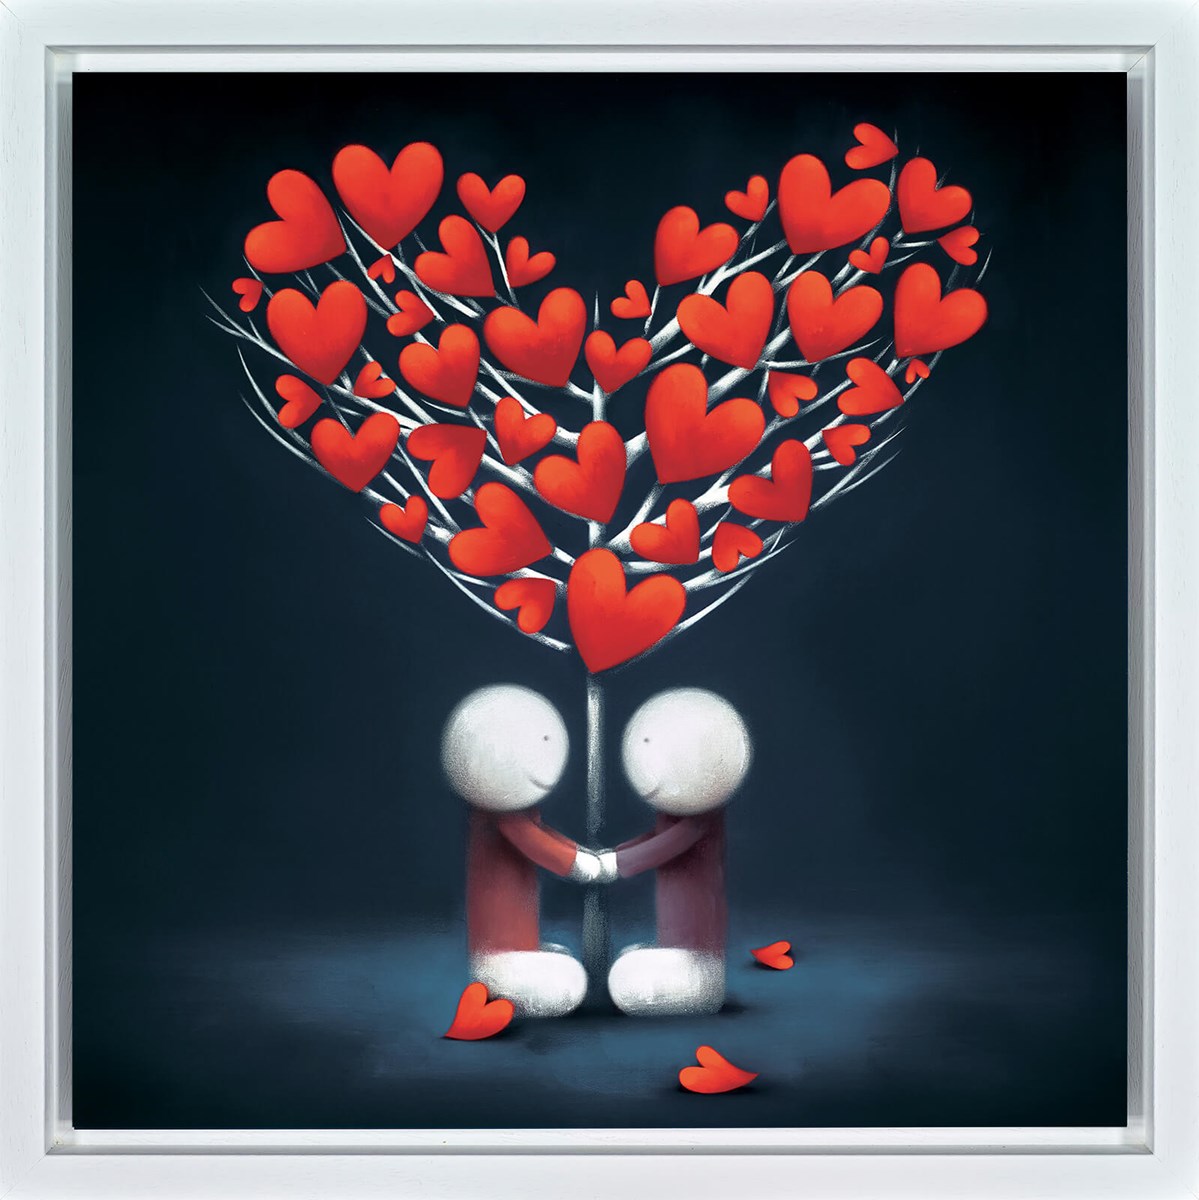 Falling in Love limited edition framed print by Doug Hyde